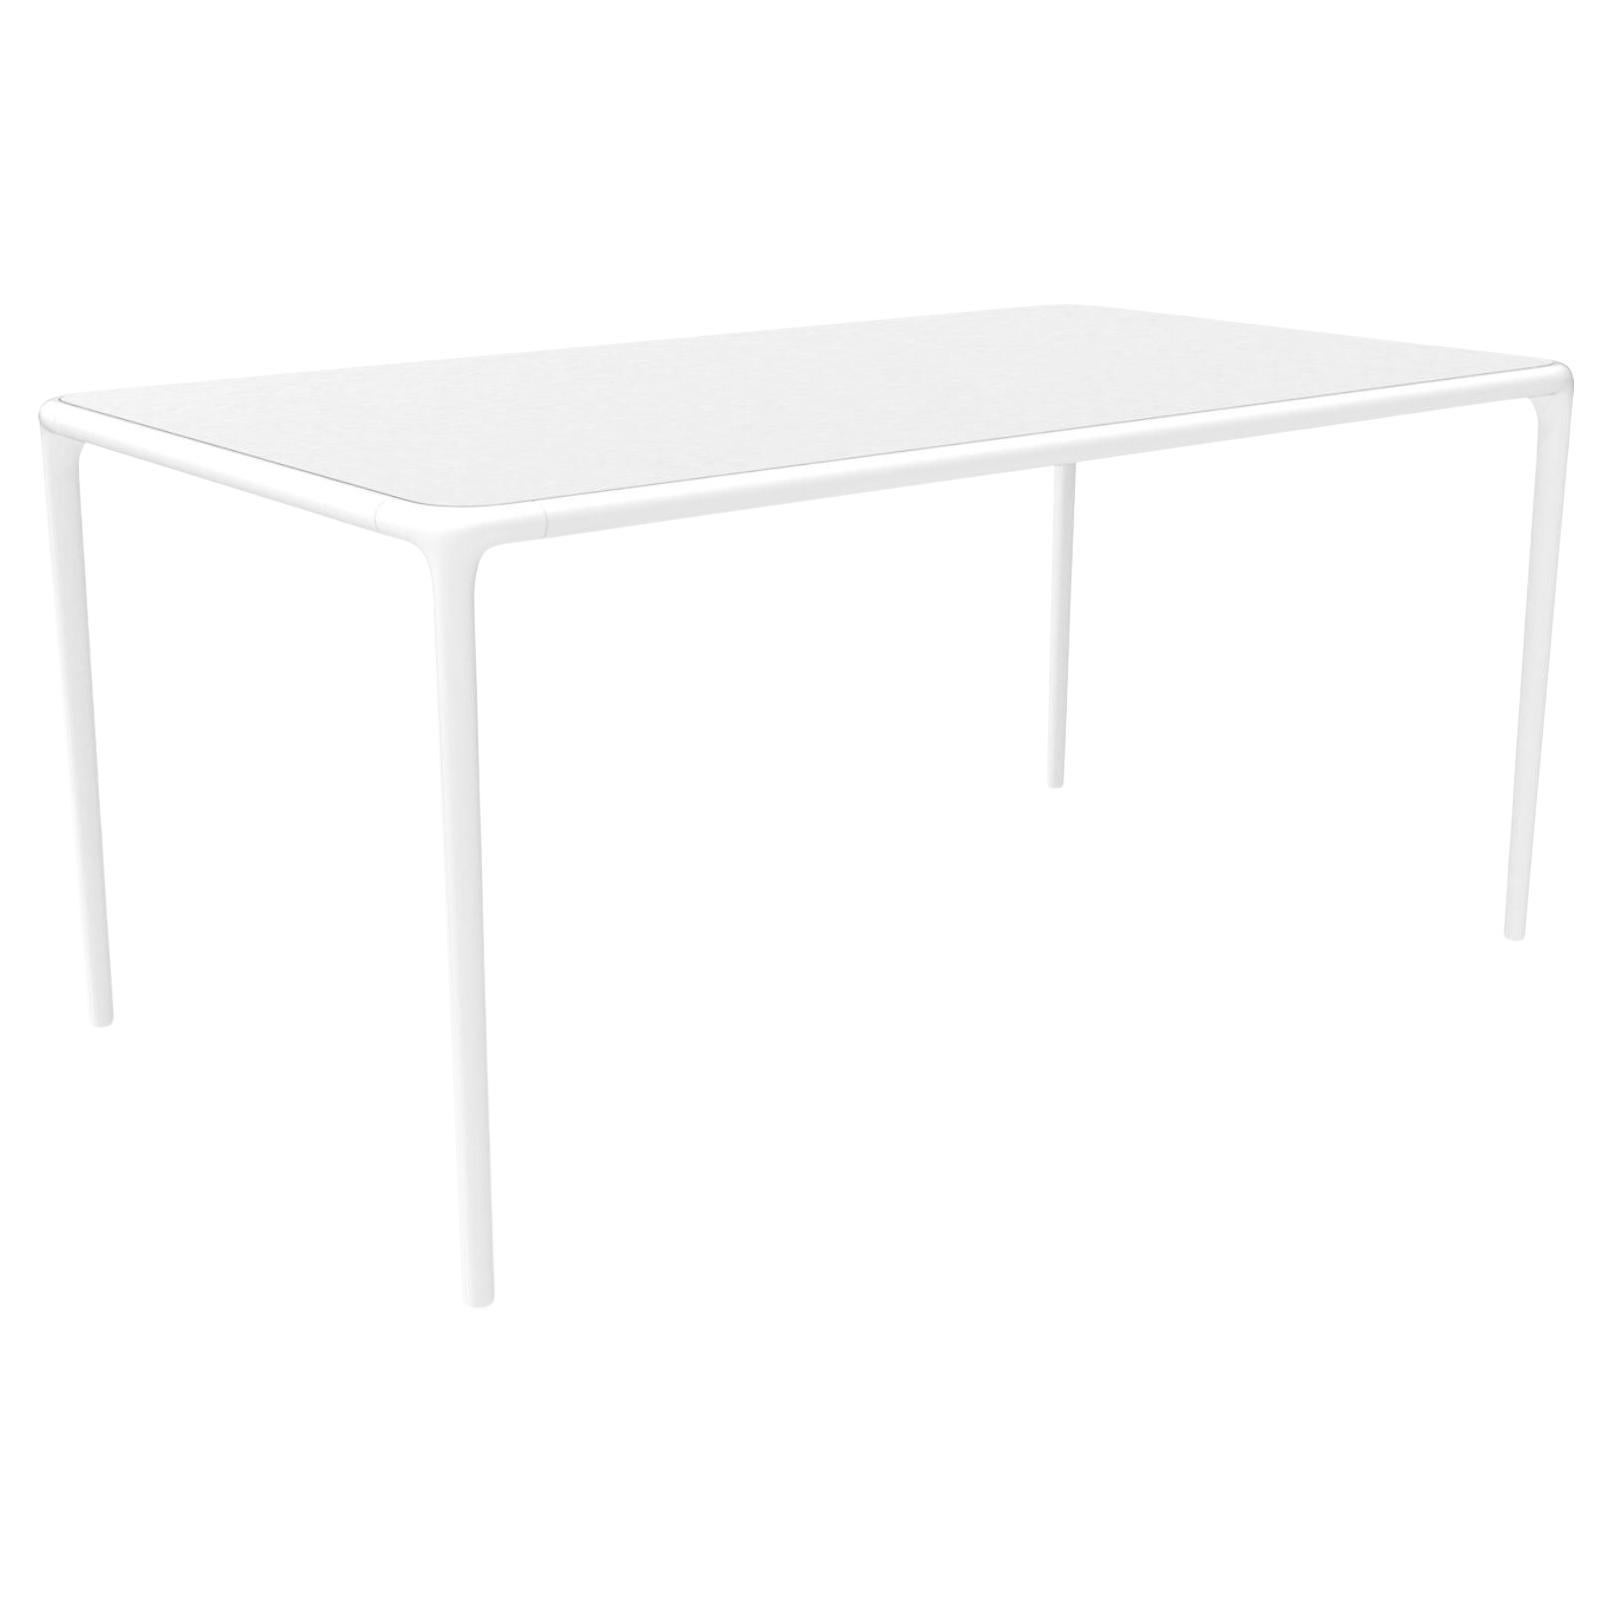 Xaloc White Glass Top Table 160 by Mowee